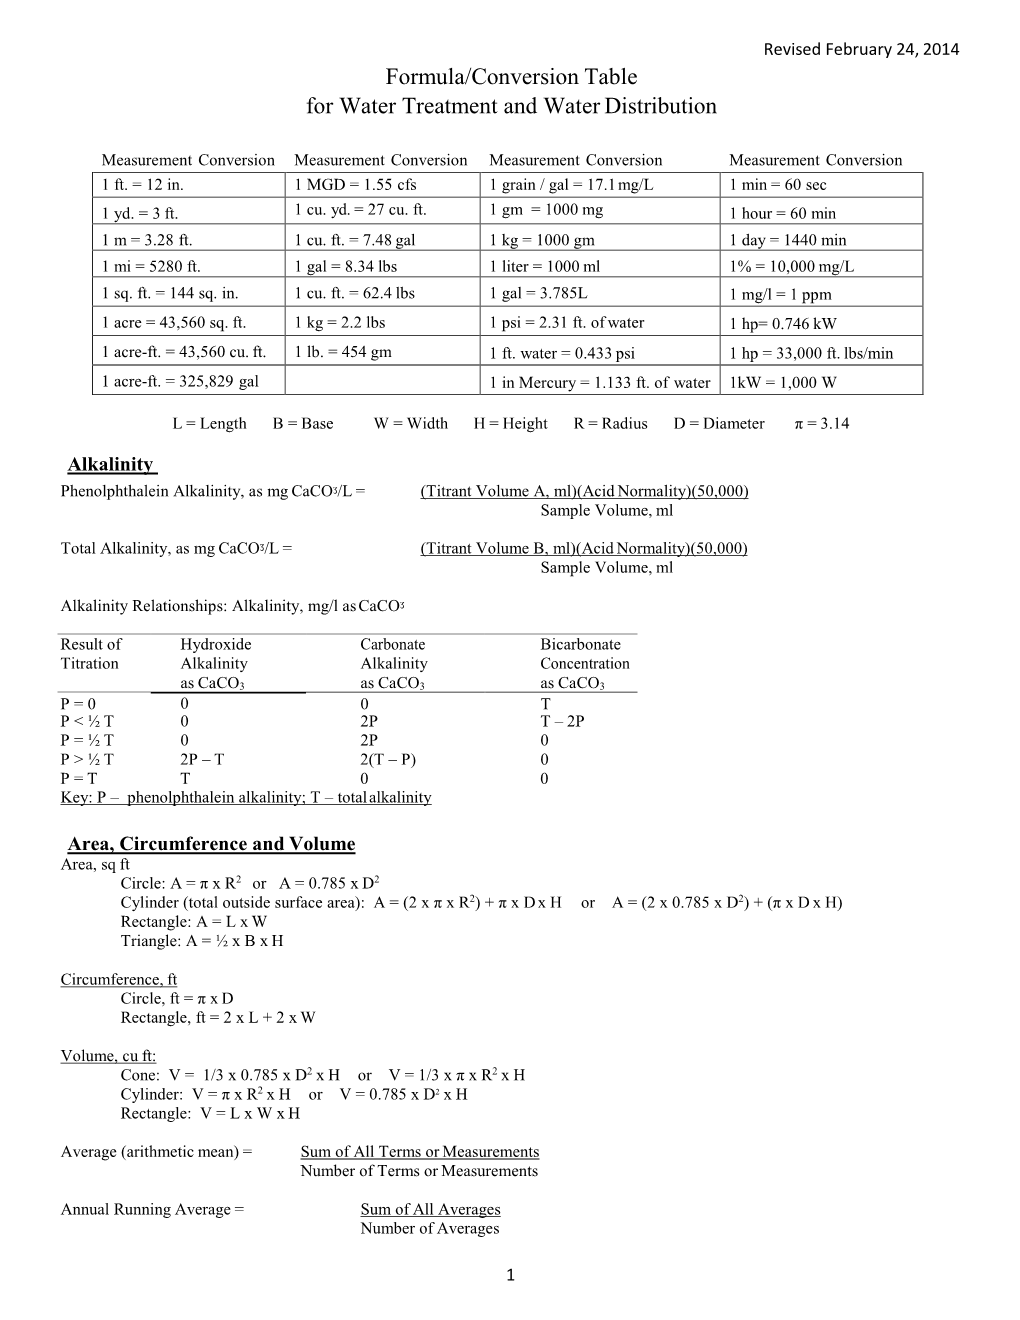 Formula/Conversion Table for Water Treatment and Water Distribution